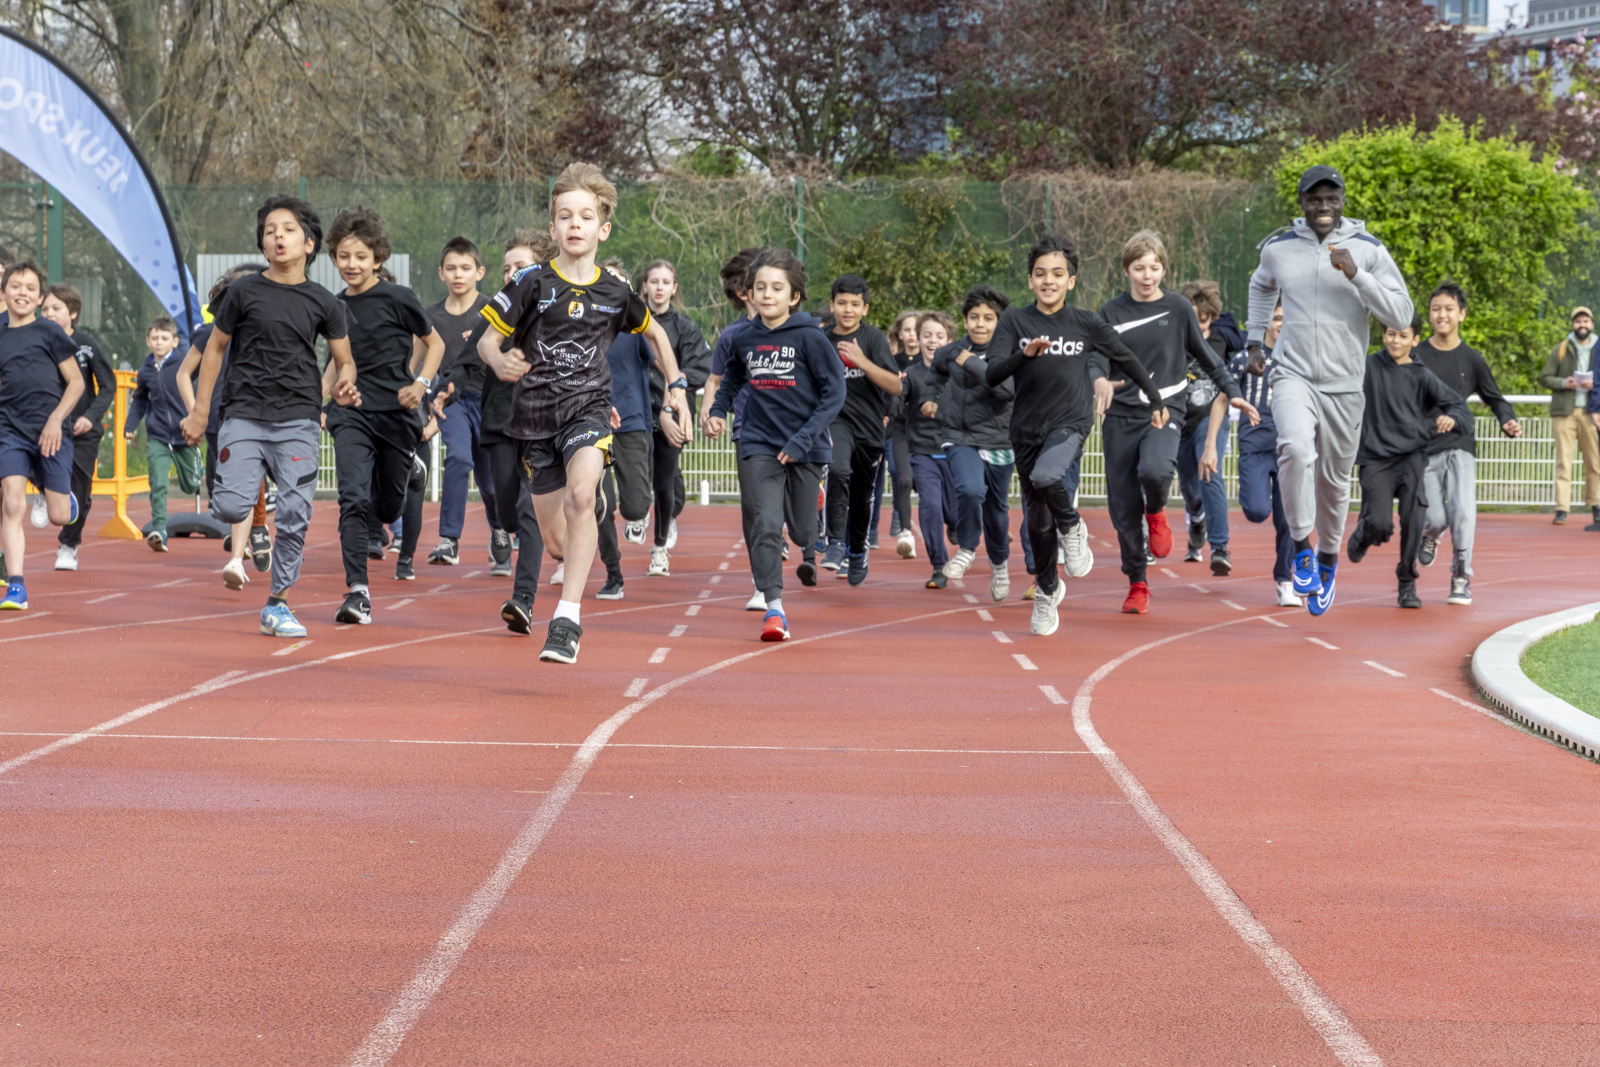 A crowd of CM2 children take to the track with Paralympic athlete Charles-Antoine Kouakou.